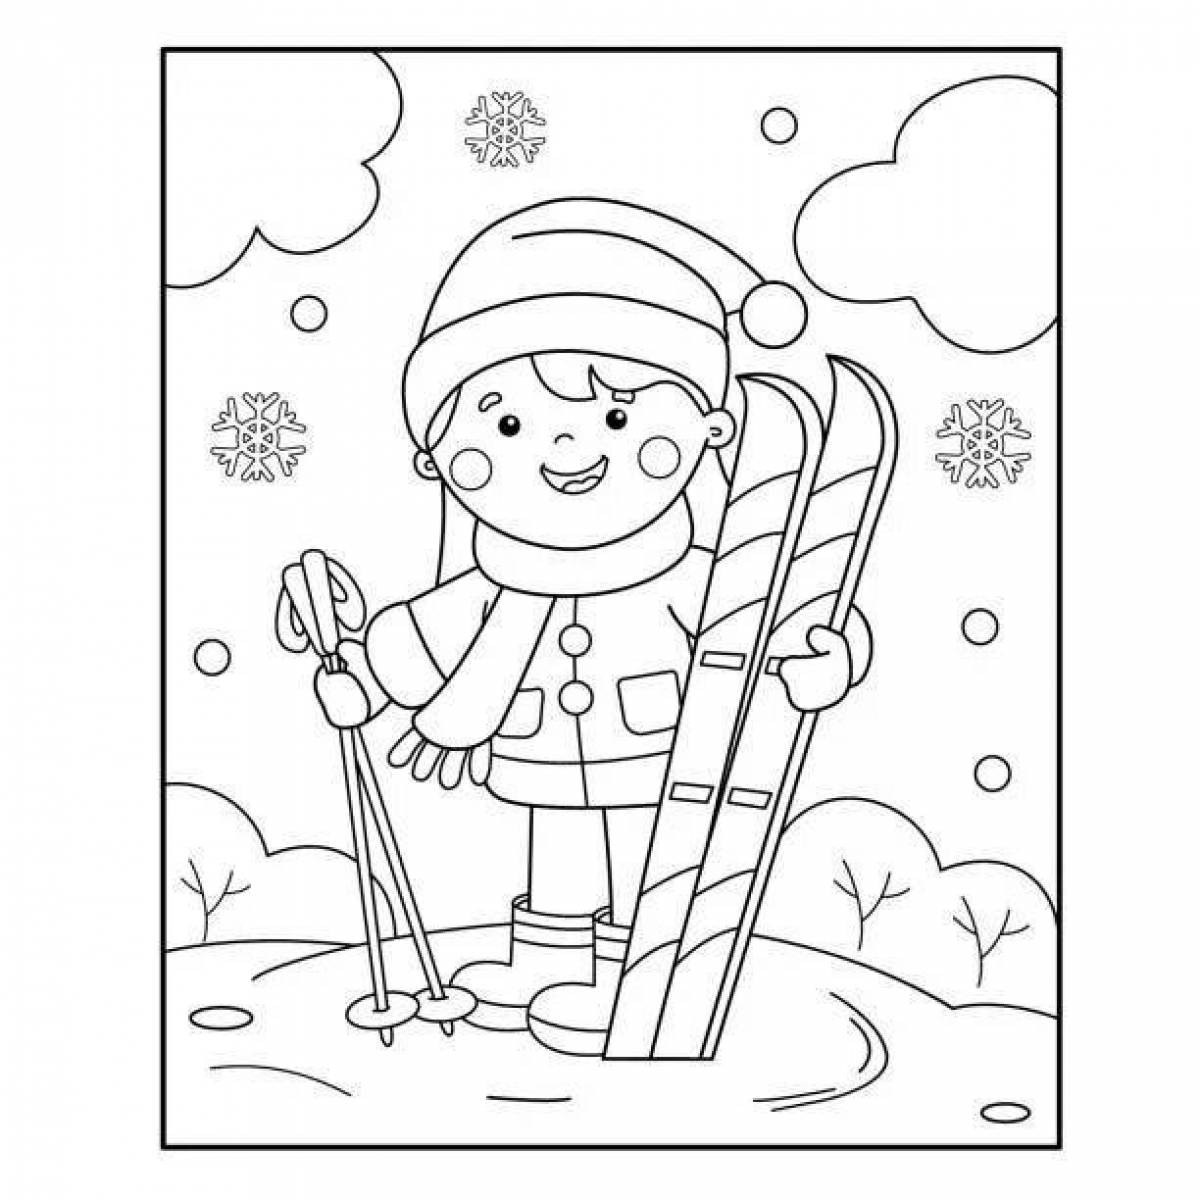 Coloring page jubilant winter sports